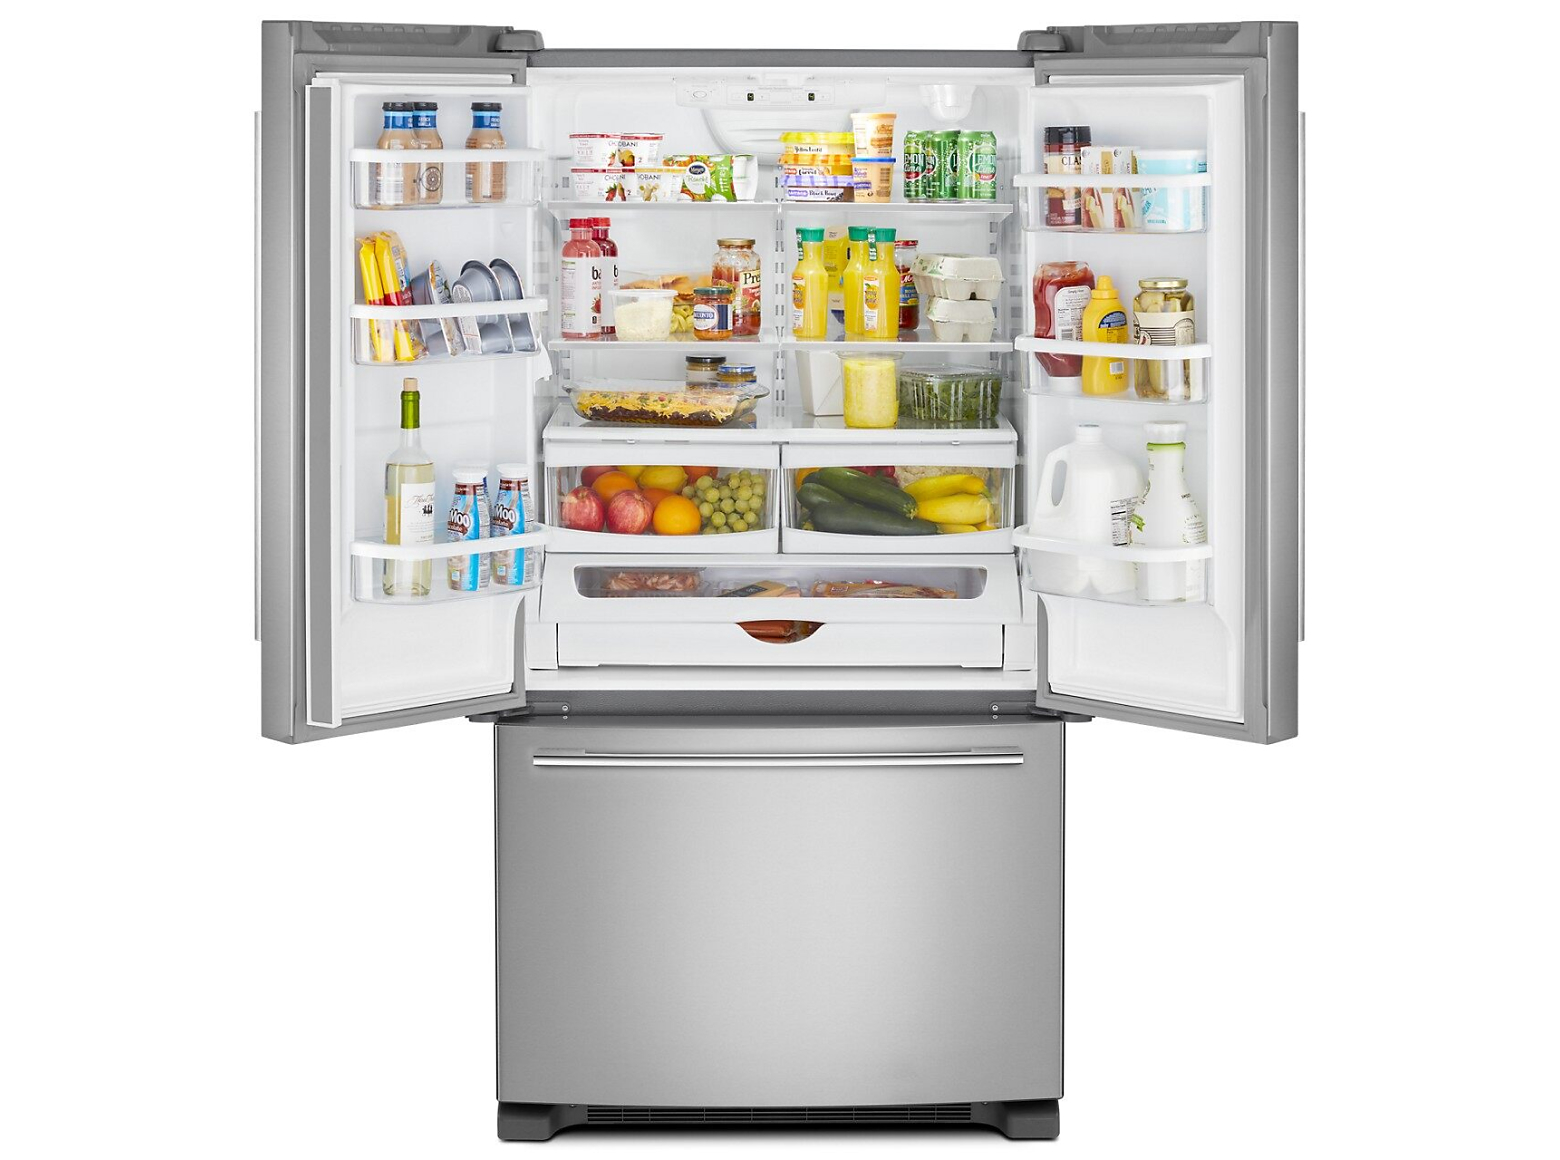 Open french door refrigerator with food inside